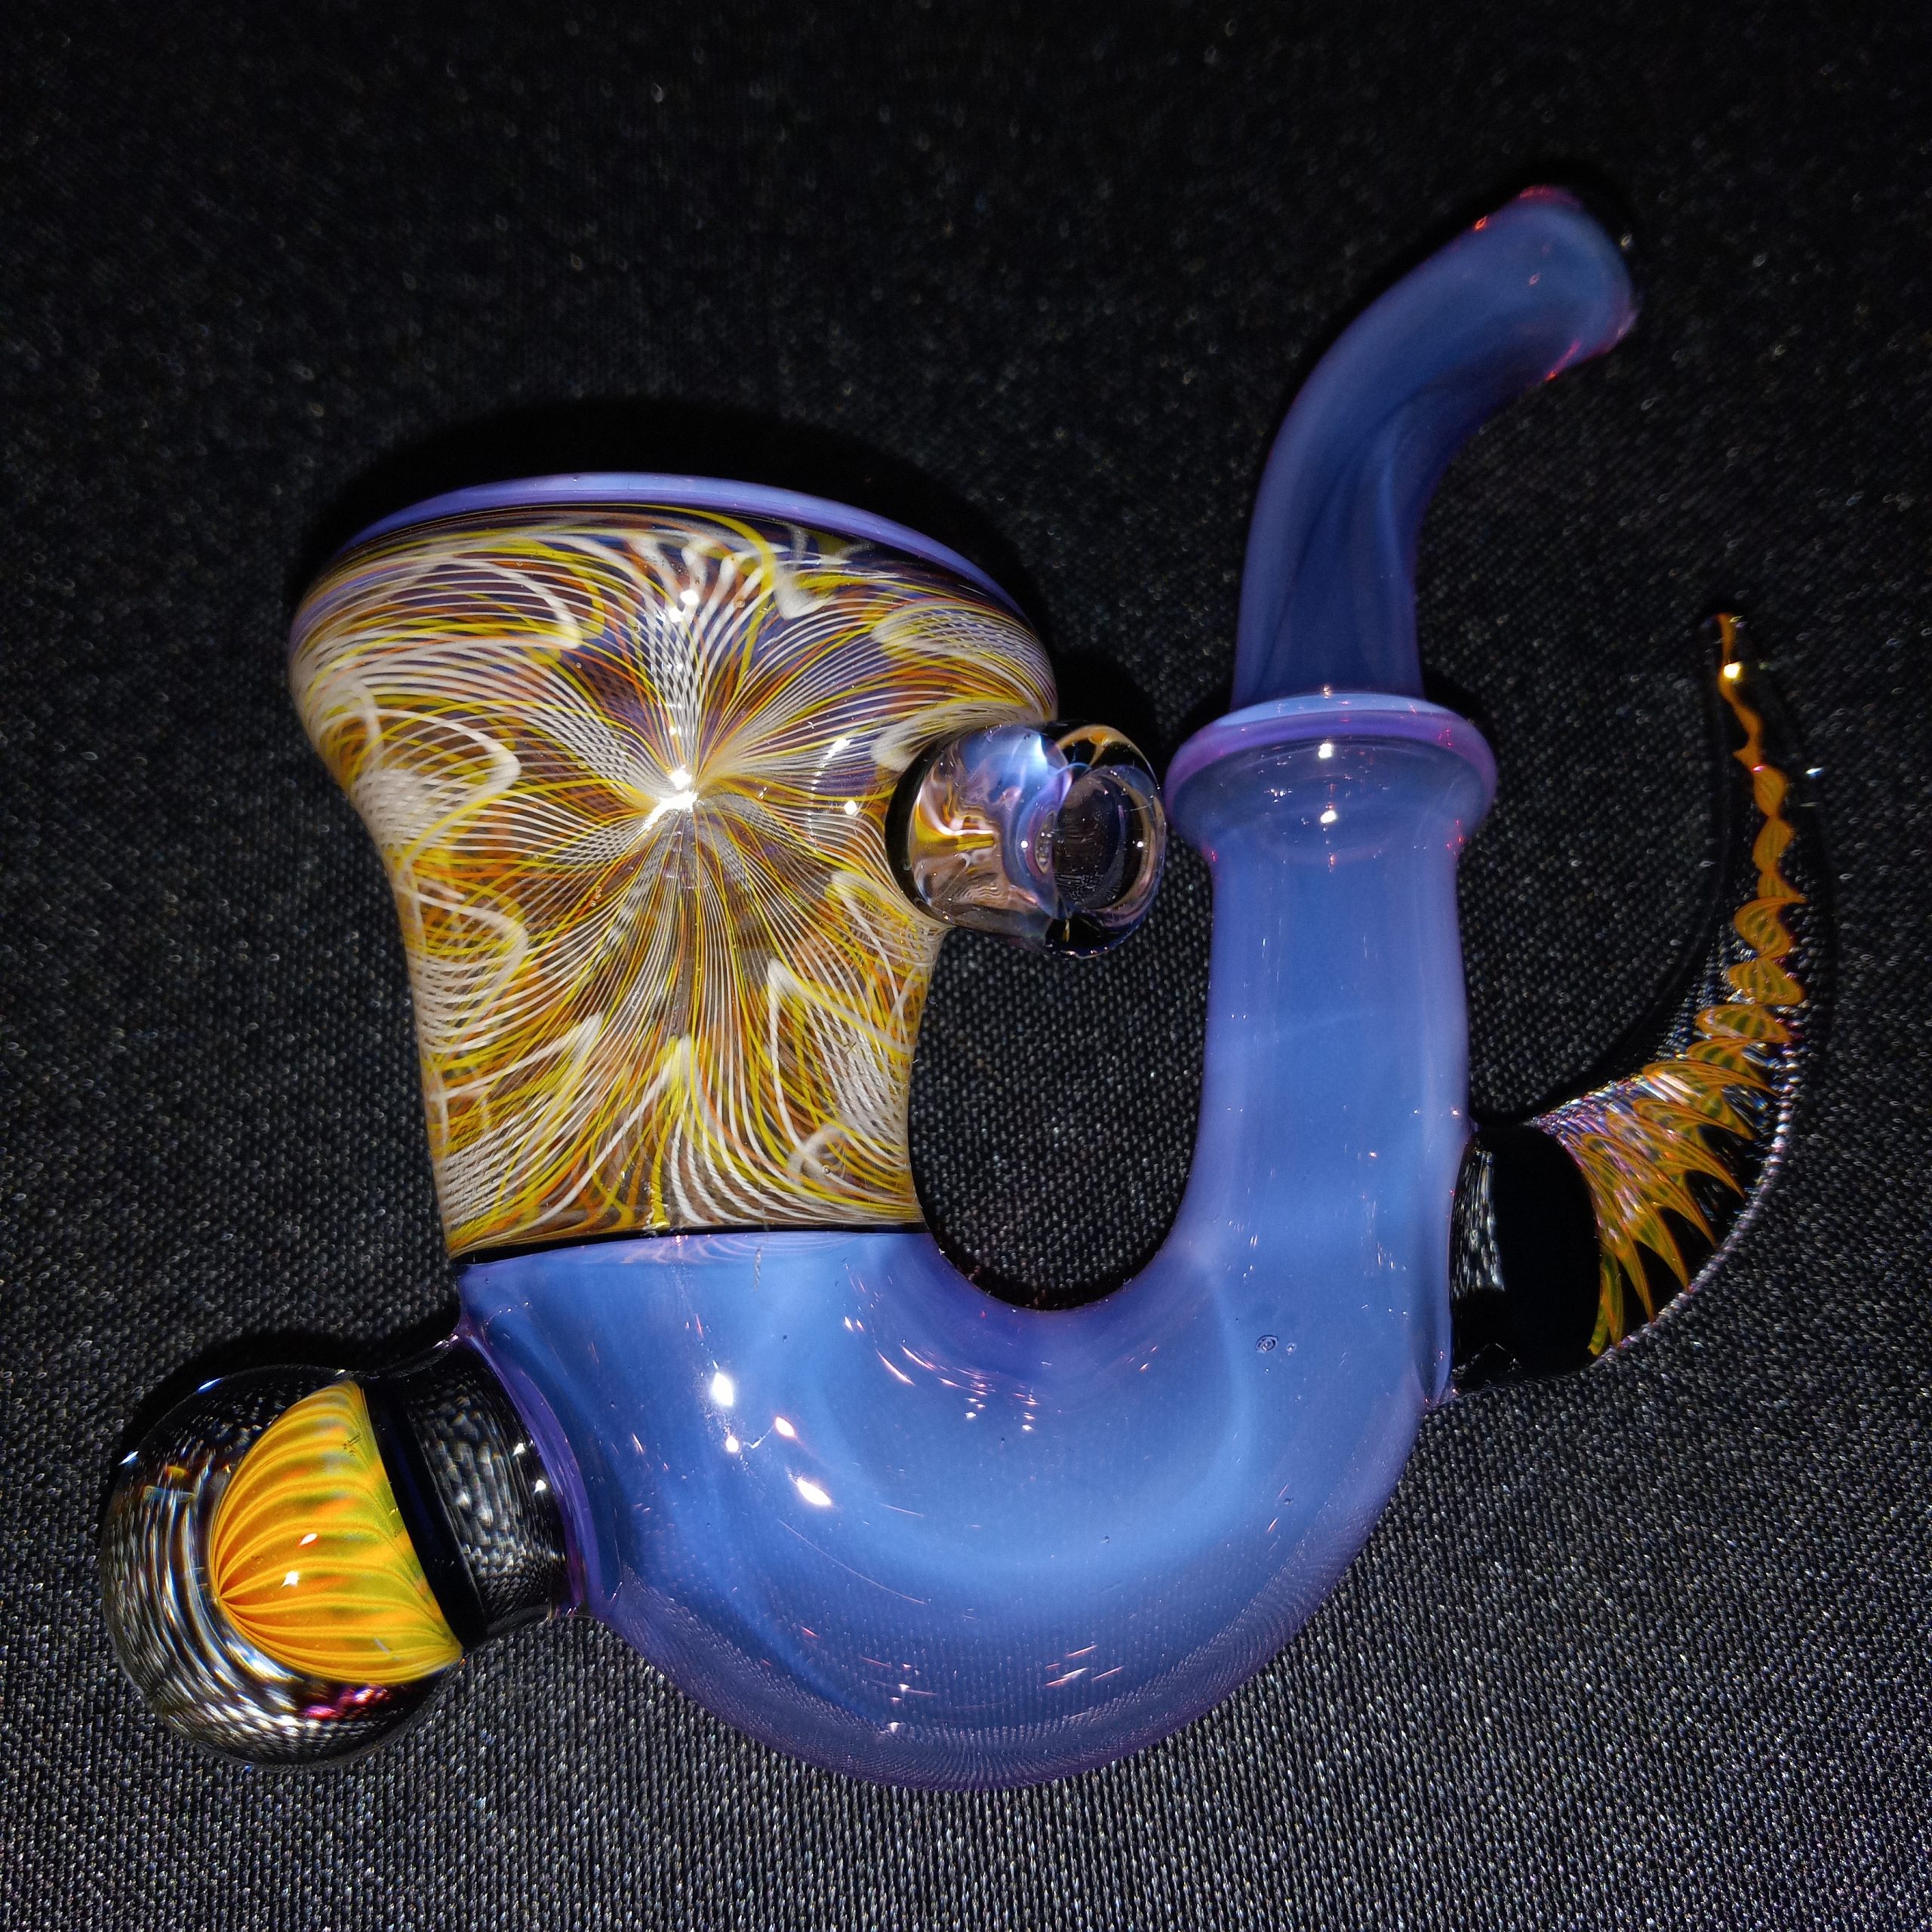 Featured image for “Terry Sharp X Moose and Fire X Future Glass Sherlock”